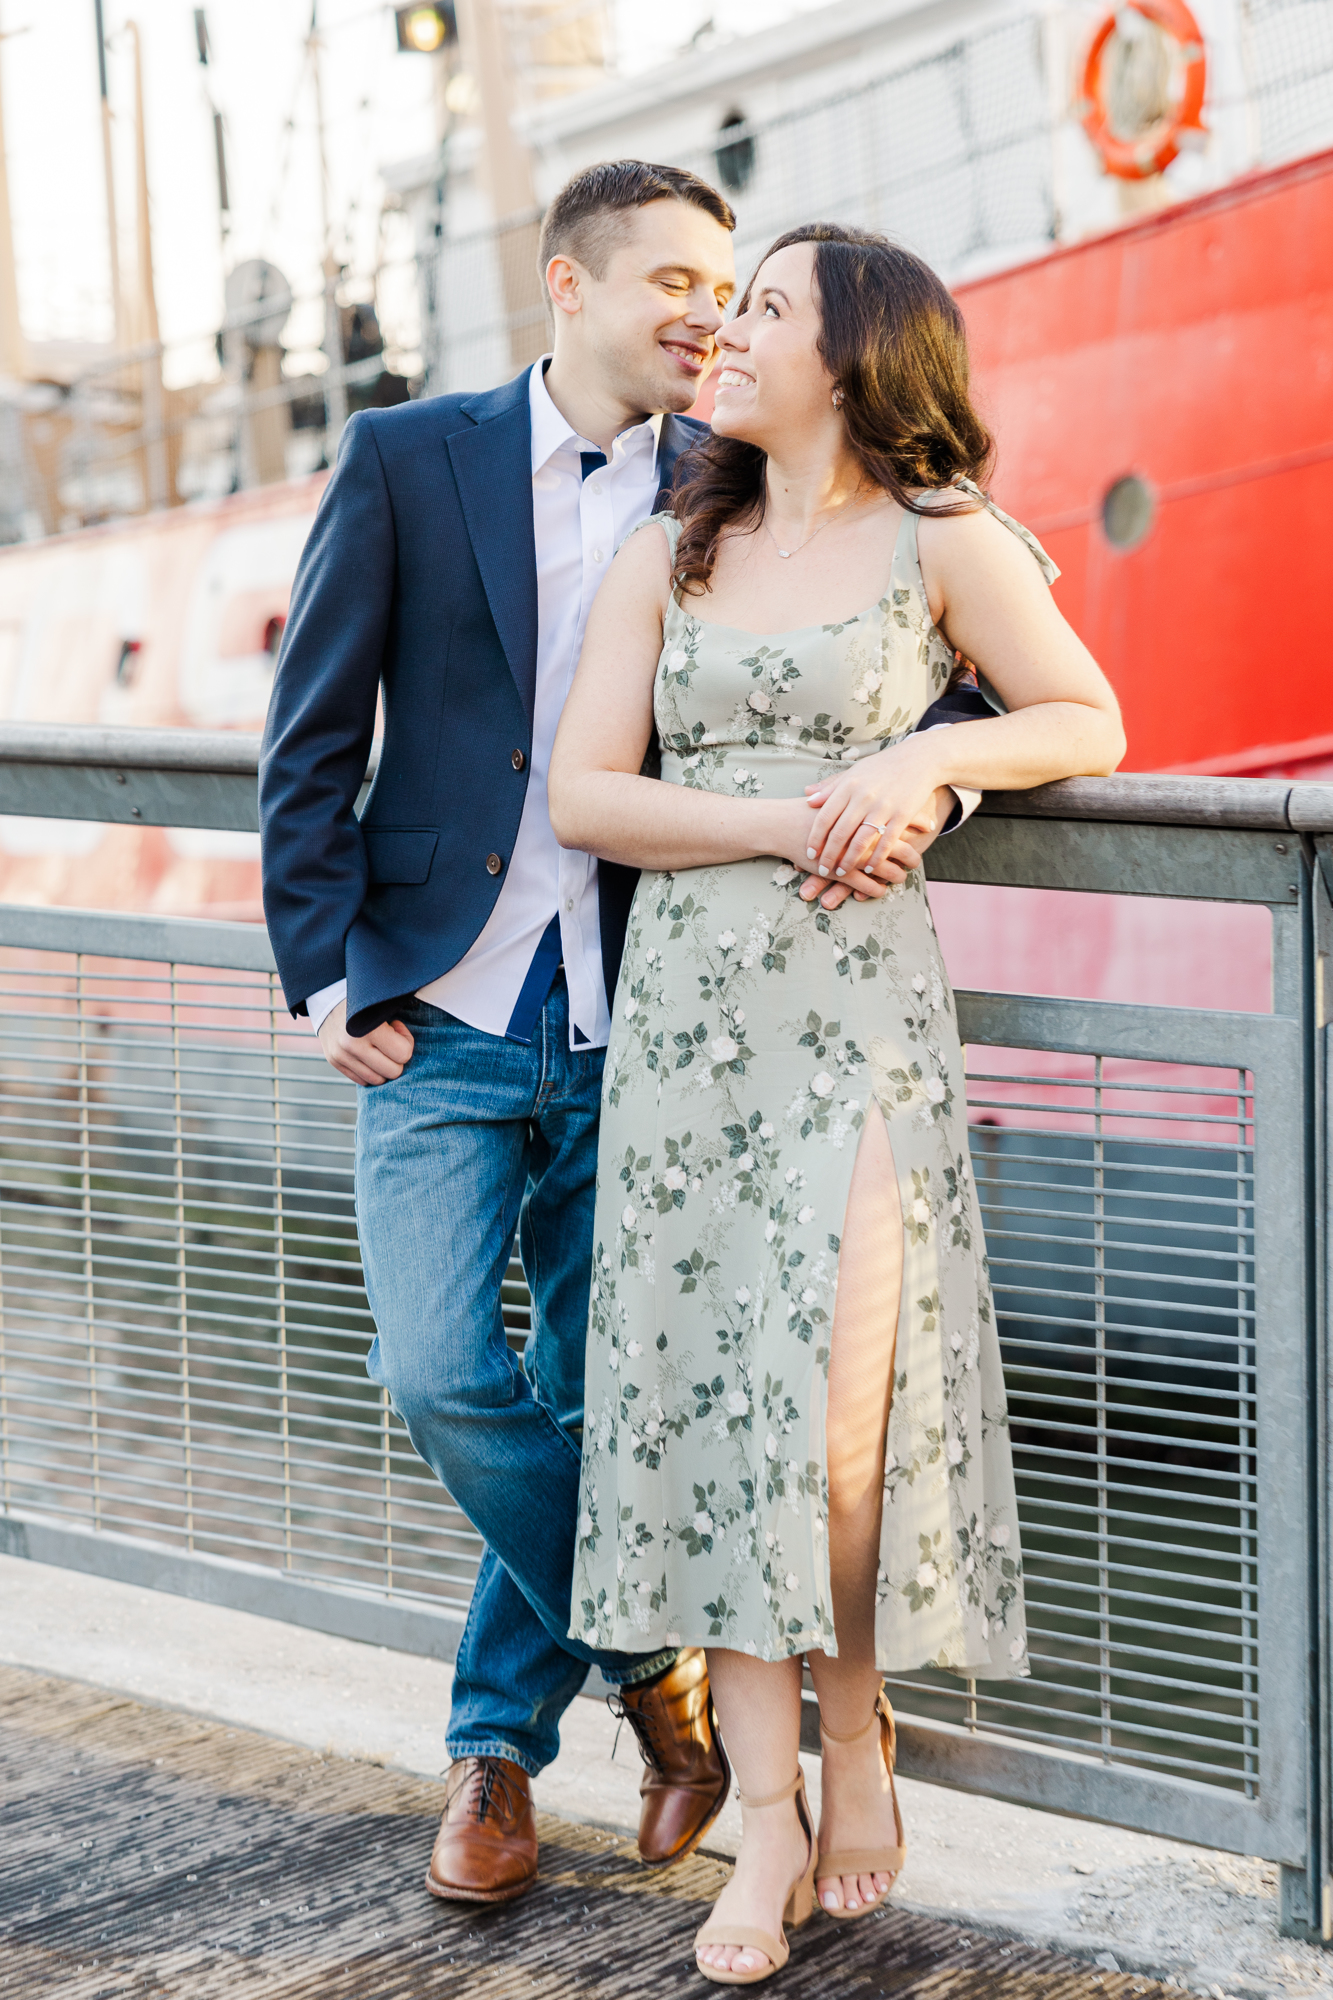 Charming Brooklyn Bridge and South Street Seaport Engagement Photography